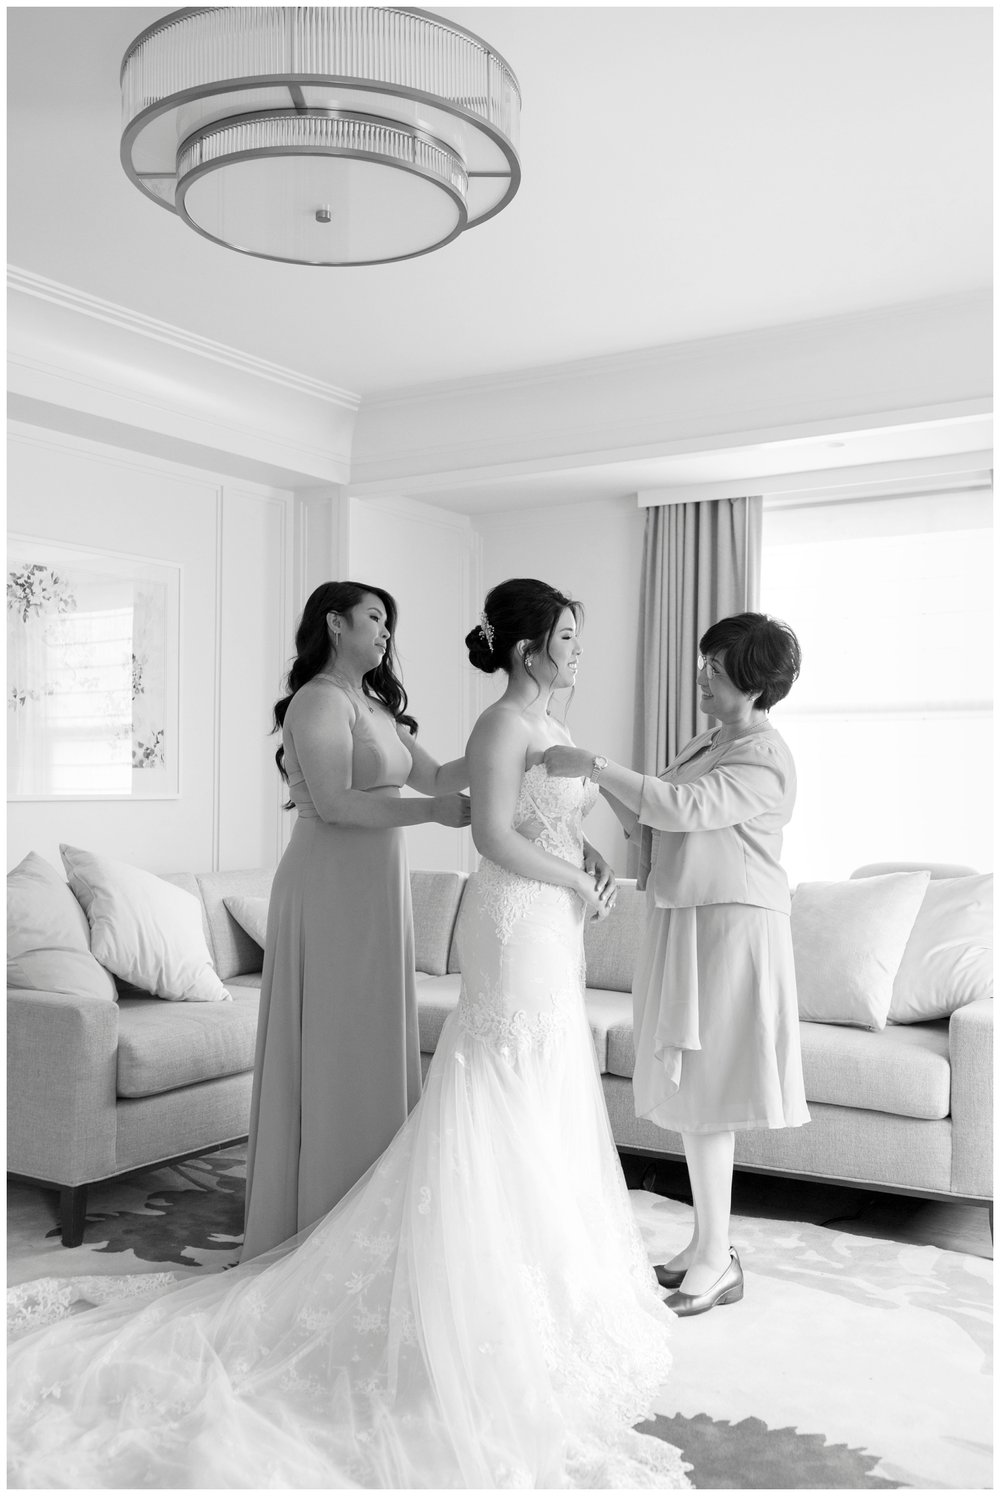 mother and bride getting ready for wedding inside The Newbury Hotel in Boston